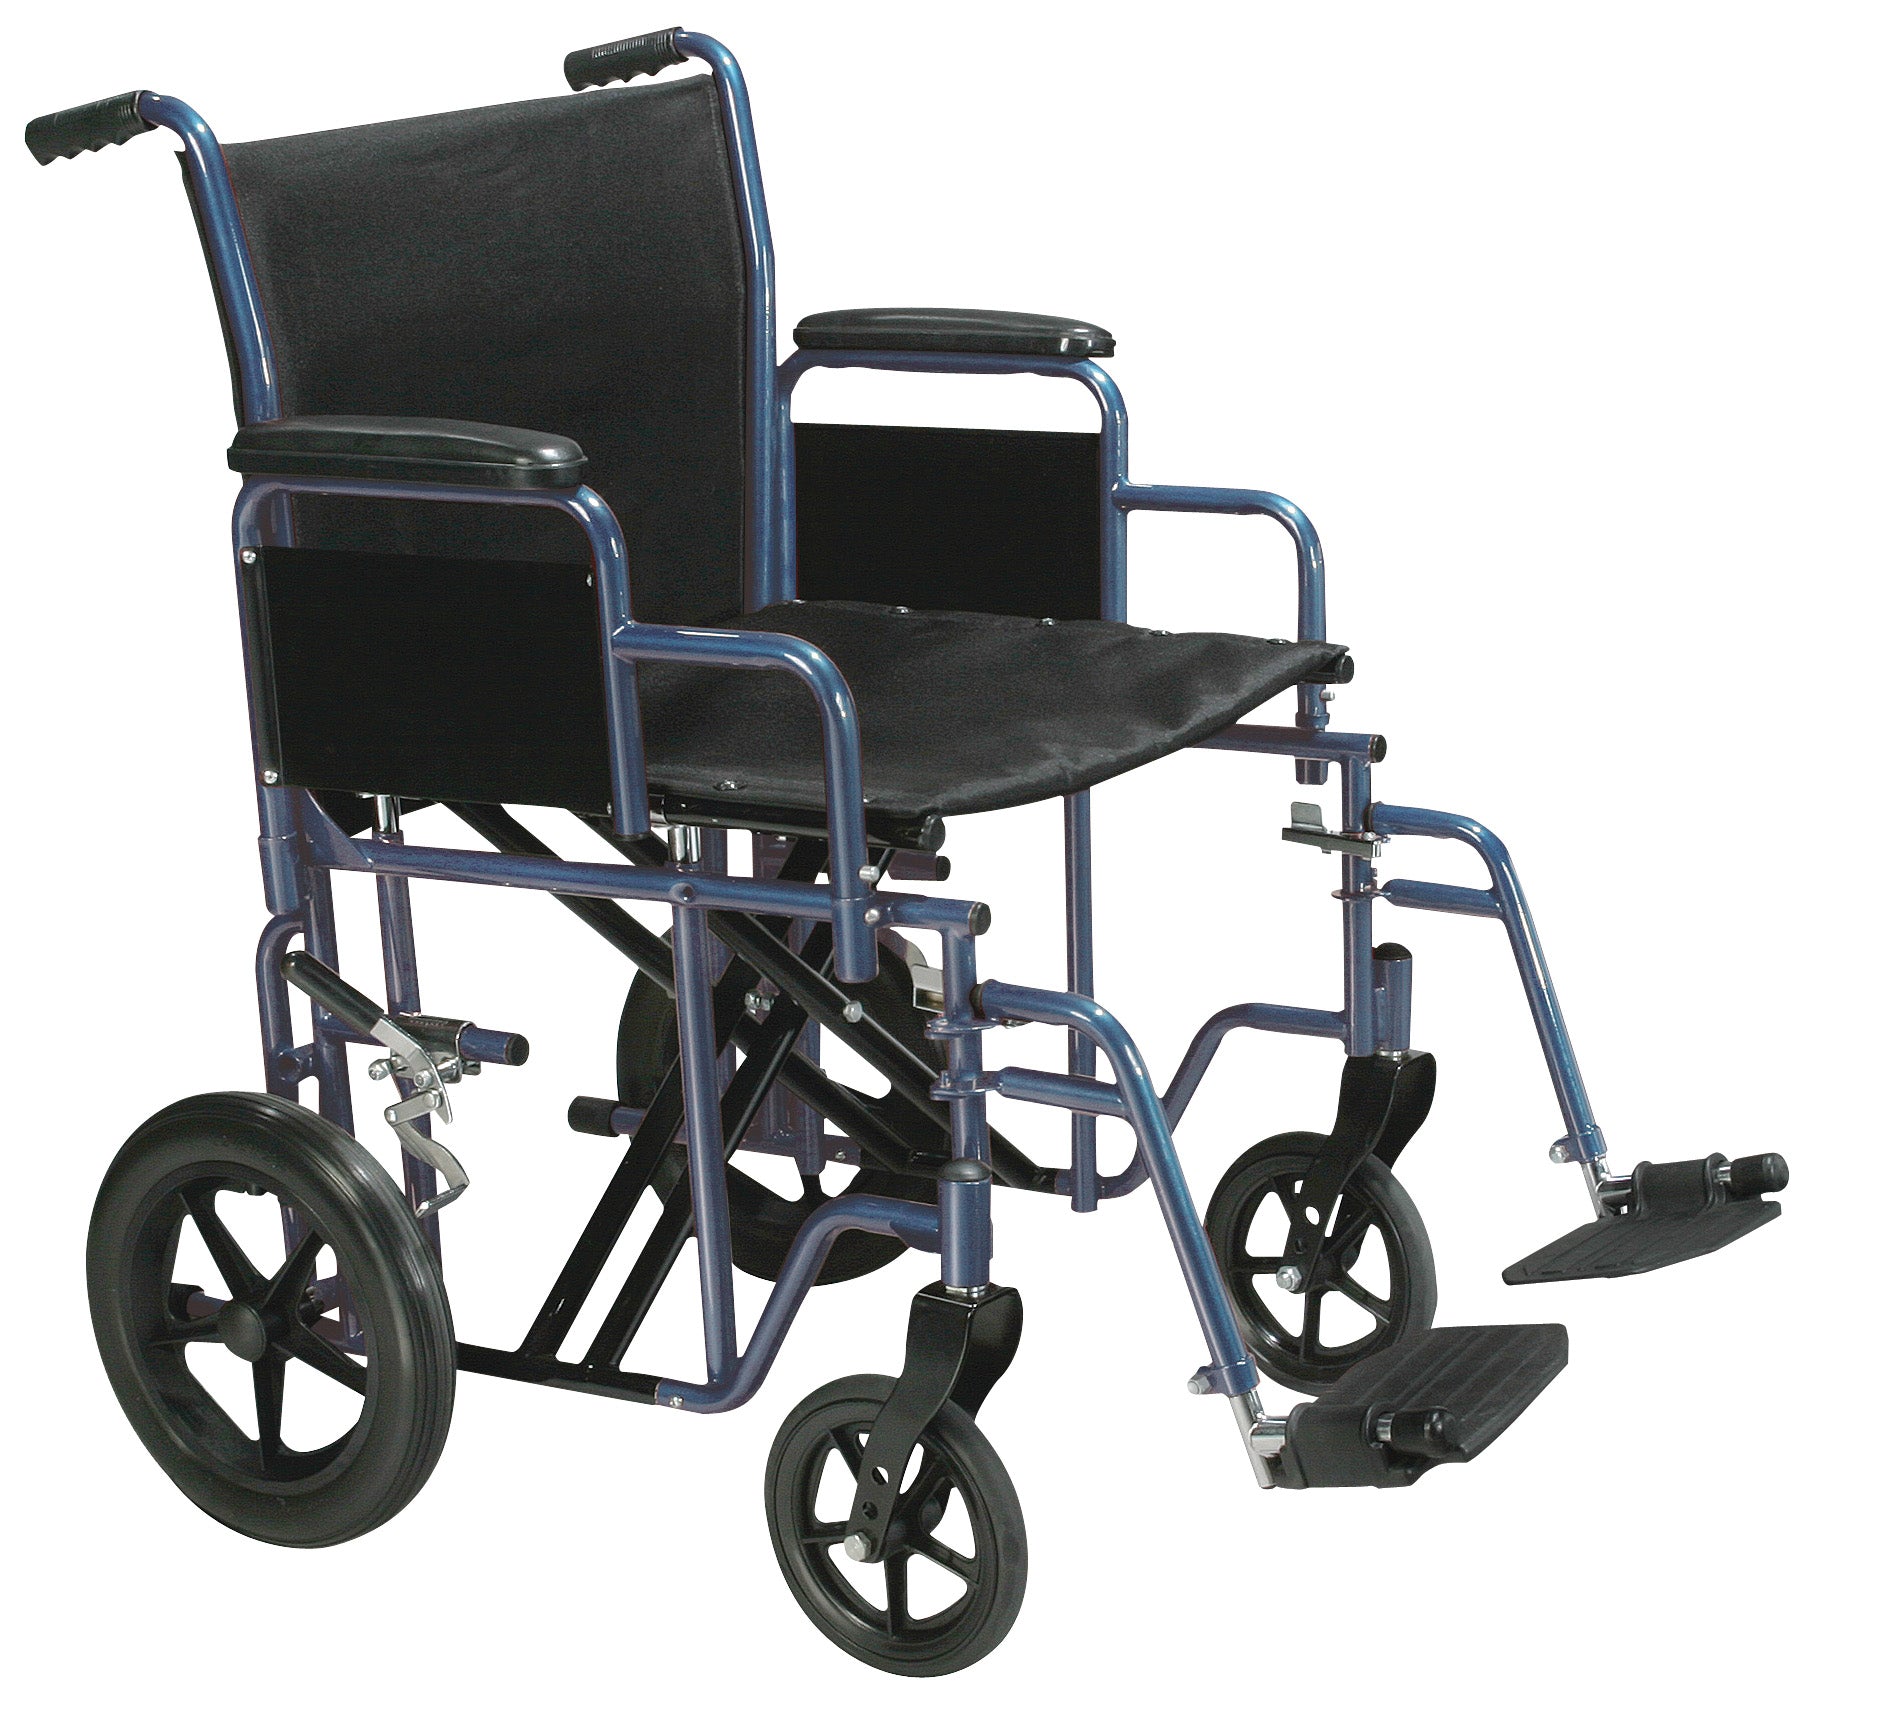 Carex Wheelchair With Large 18” Padded Seat